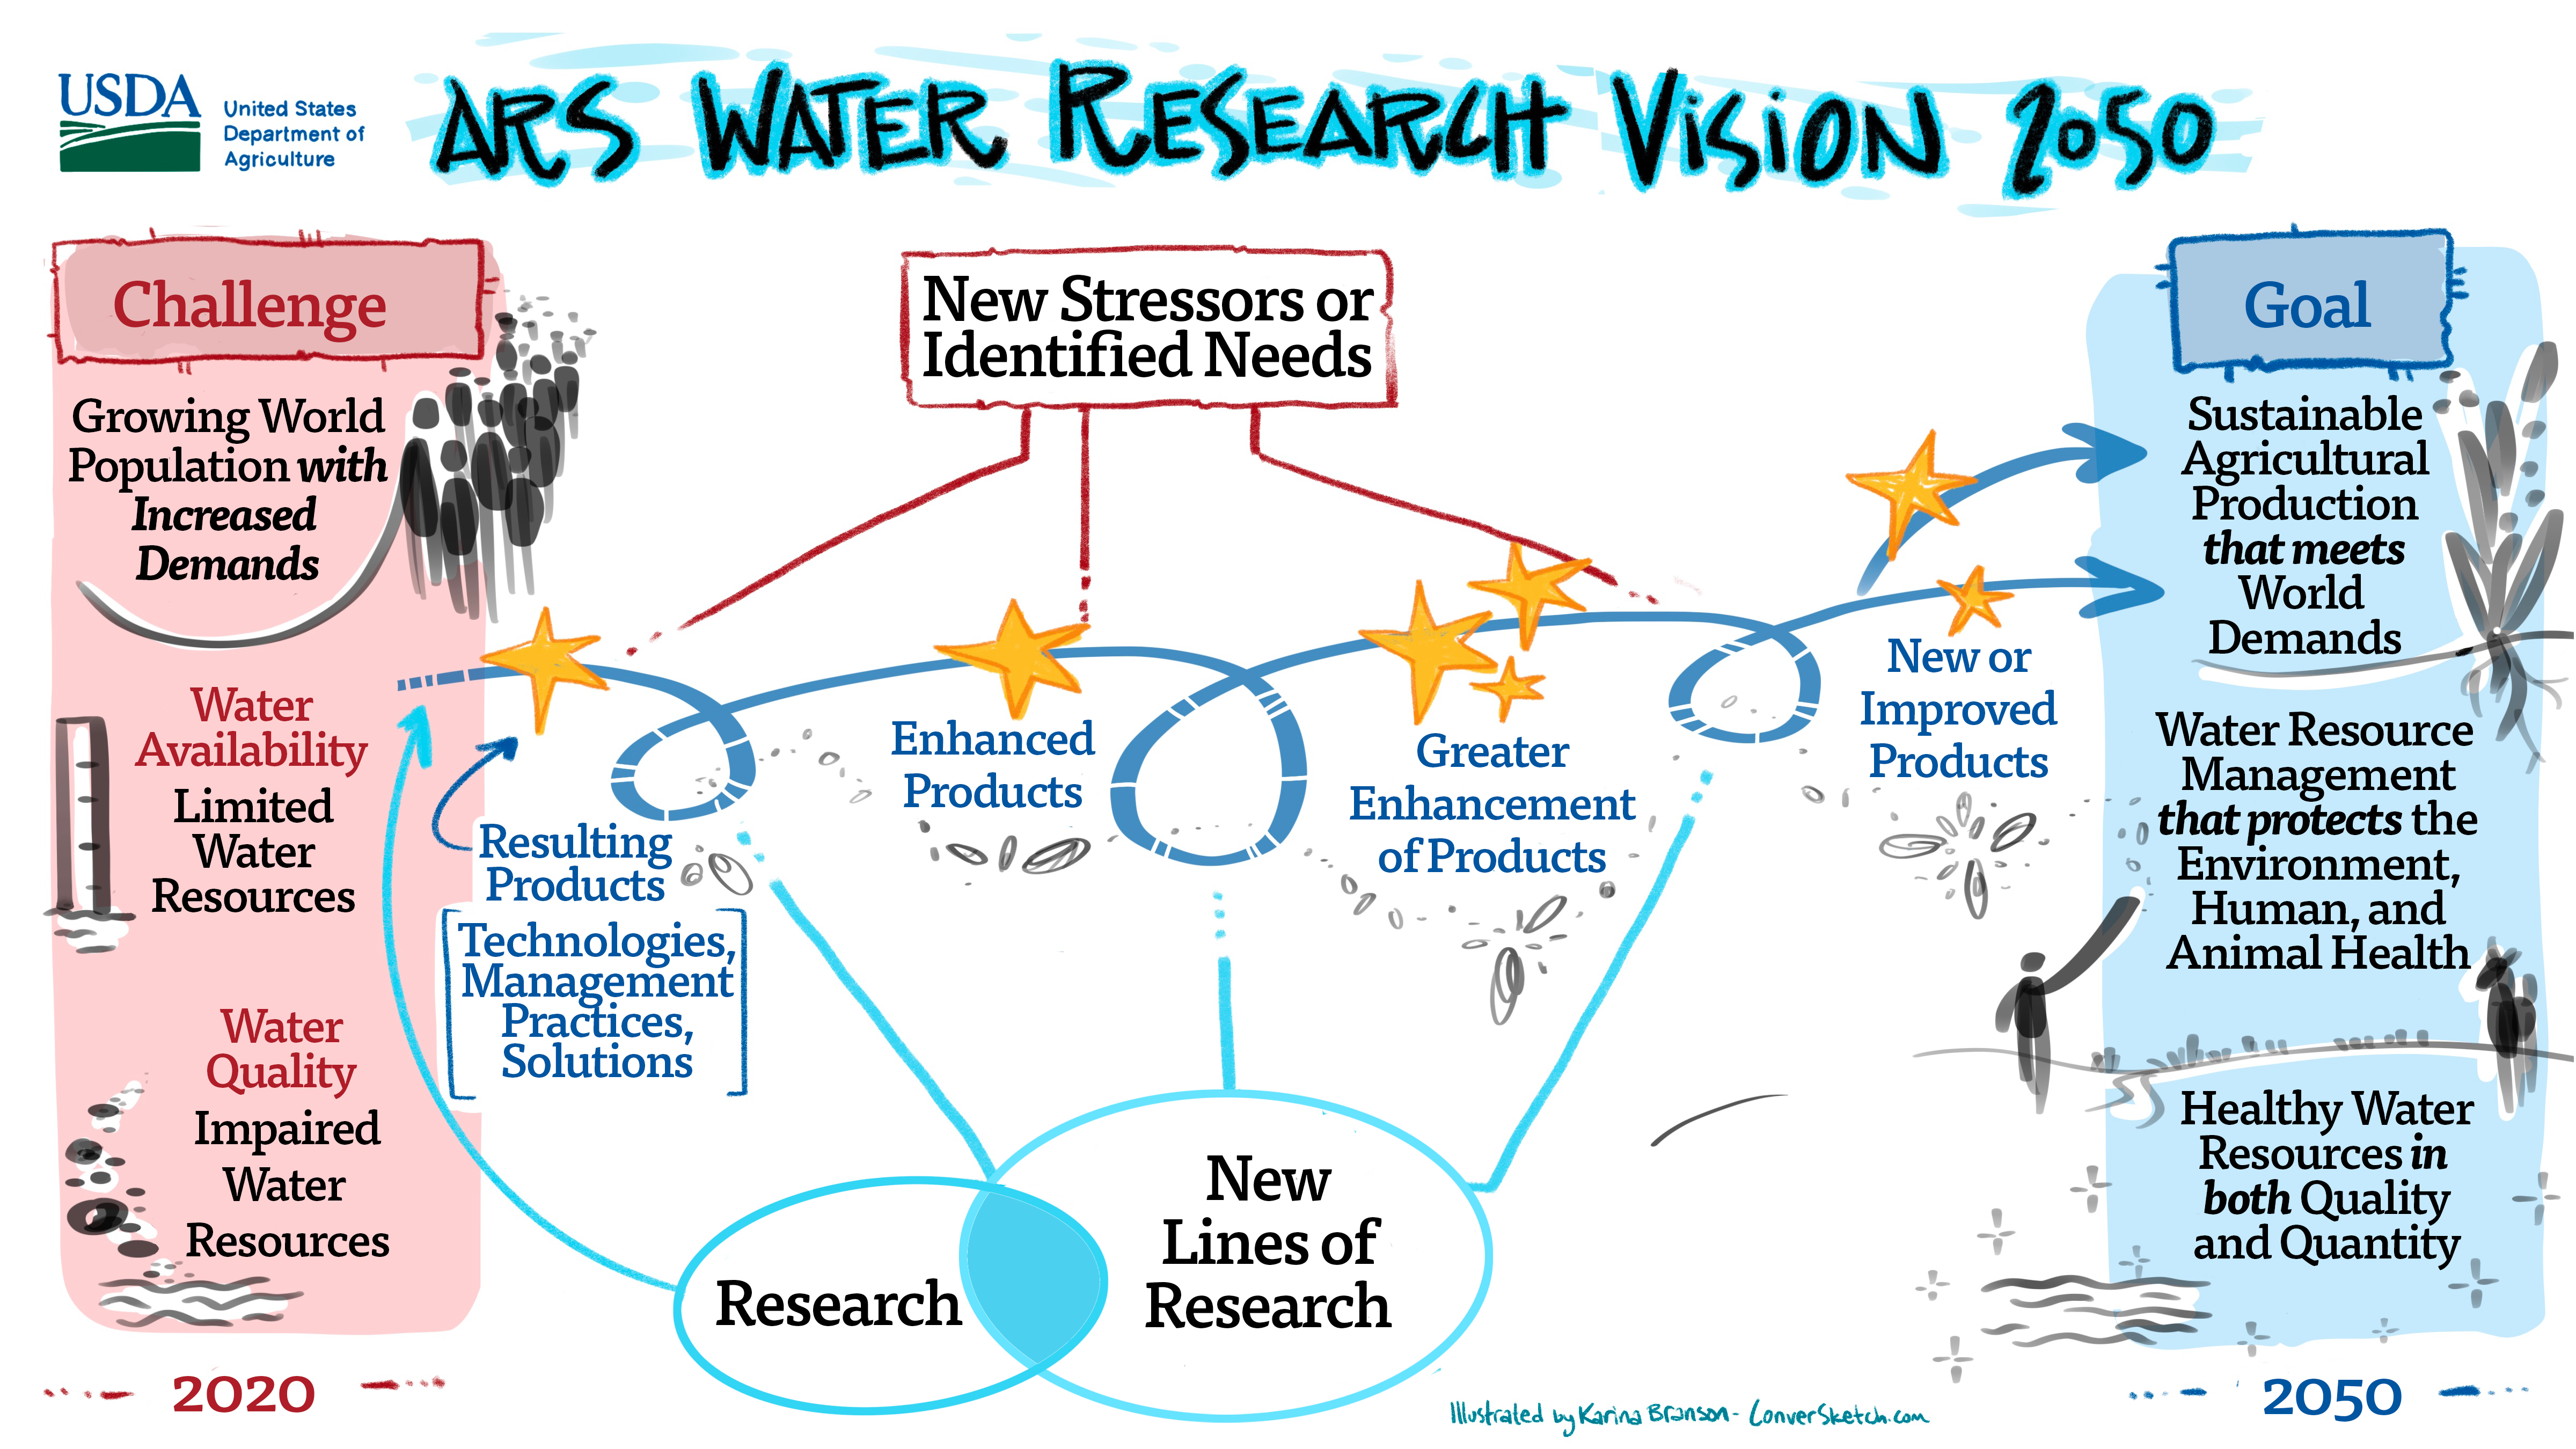 ARS Water Research Vision 2050